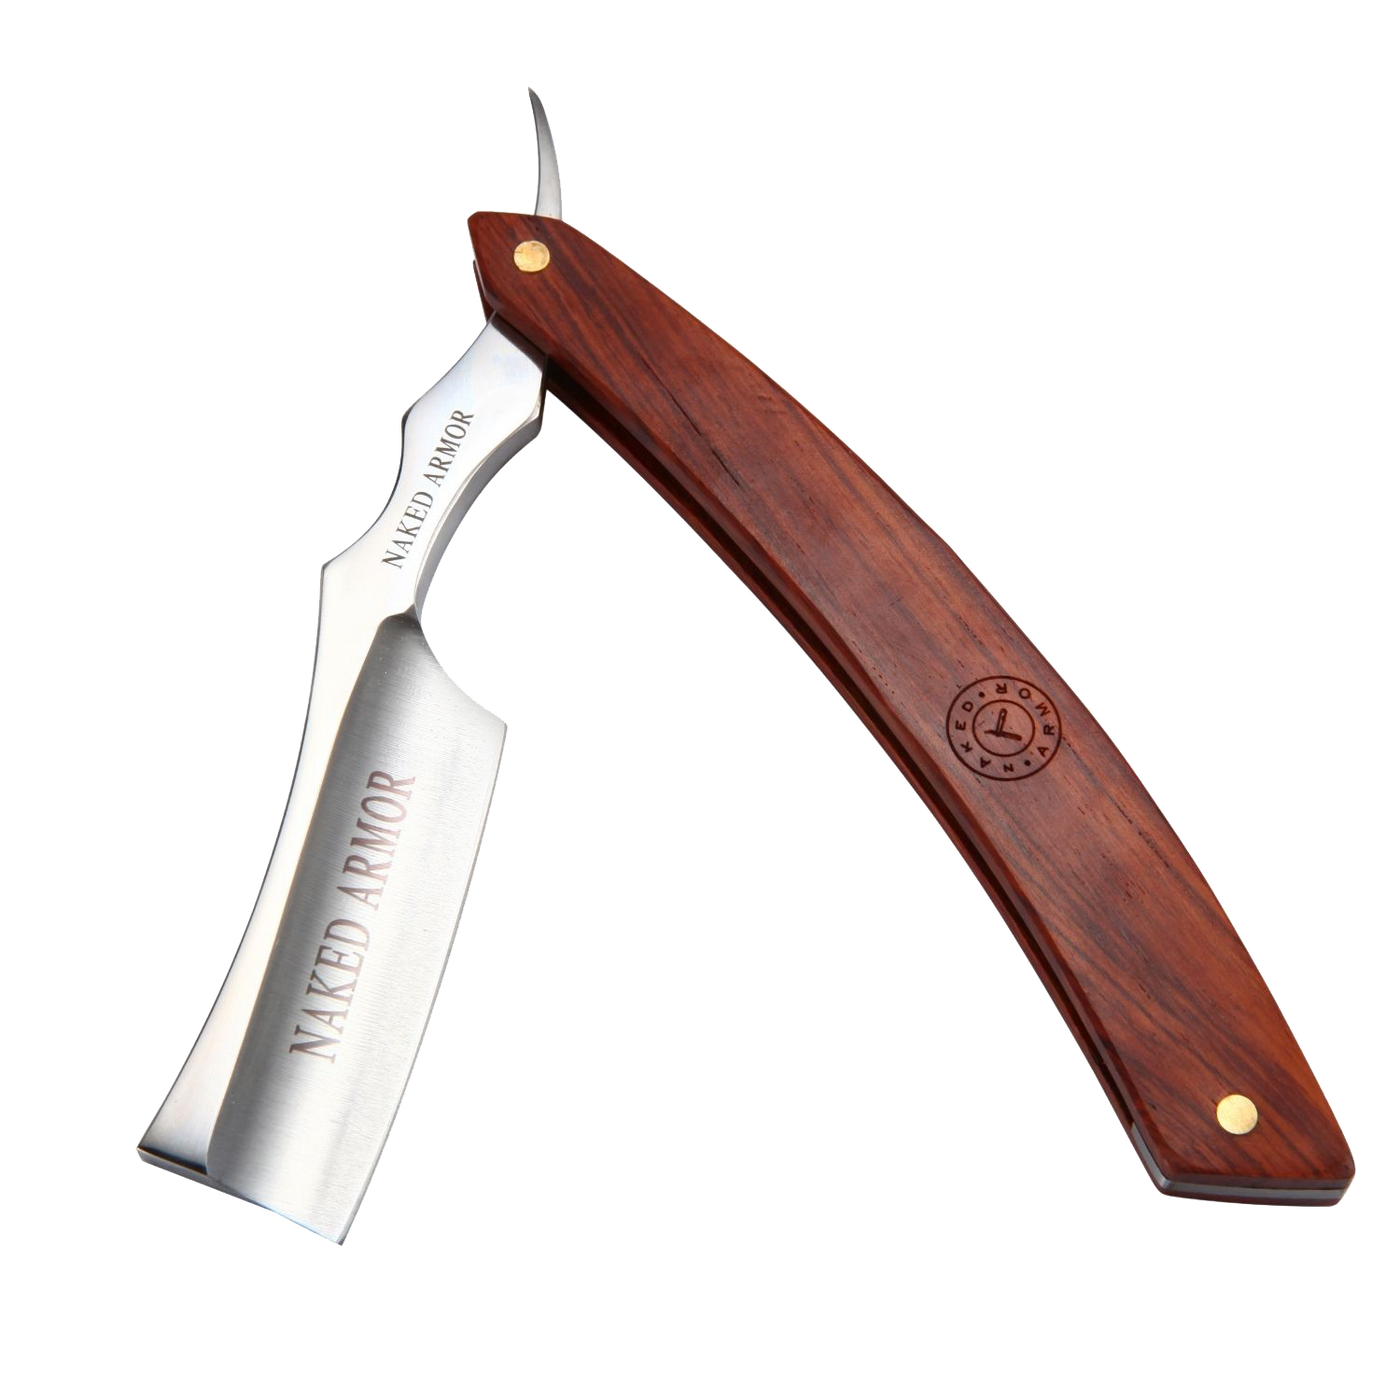  Thor Straight Razor Kit by Naked Armor sold by Naked Armor Razors